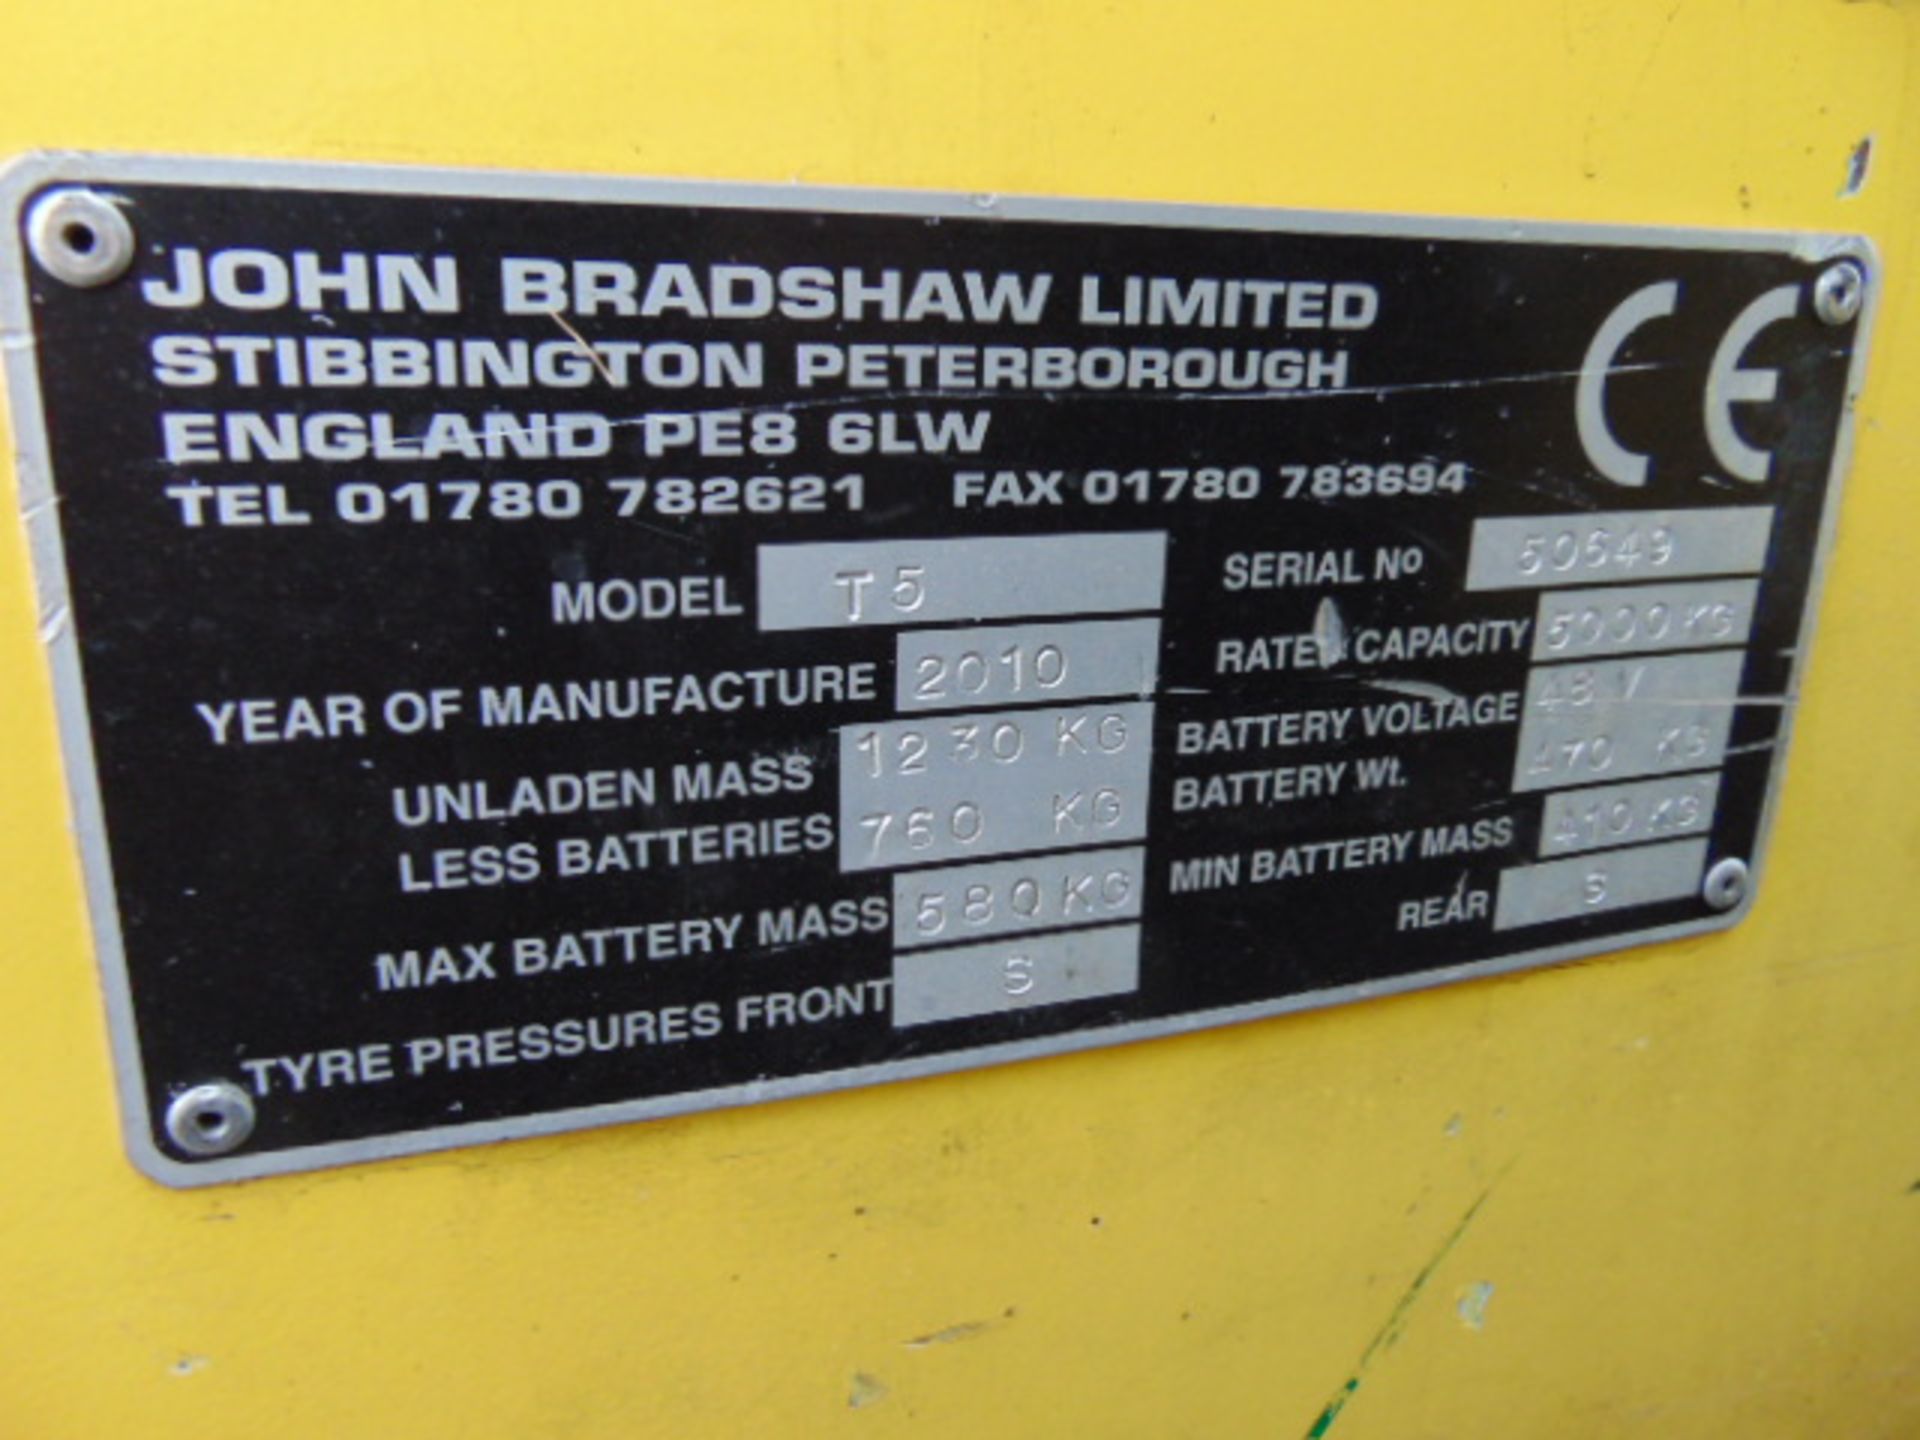 2010 Bradshaw T5 Electric Tow Tractor c/w Battery Charger - Image 13 of 13